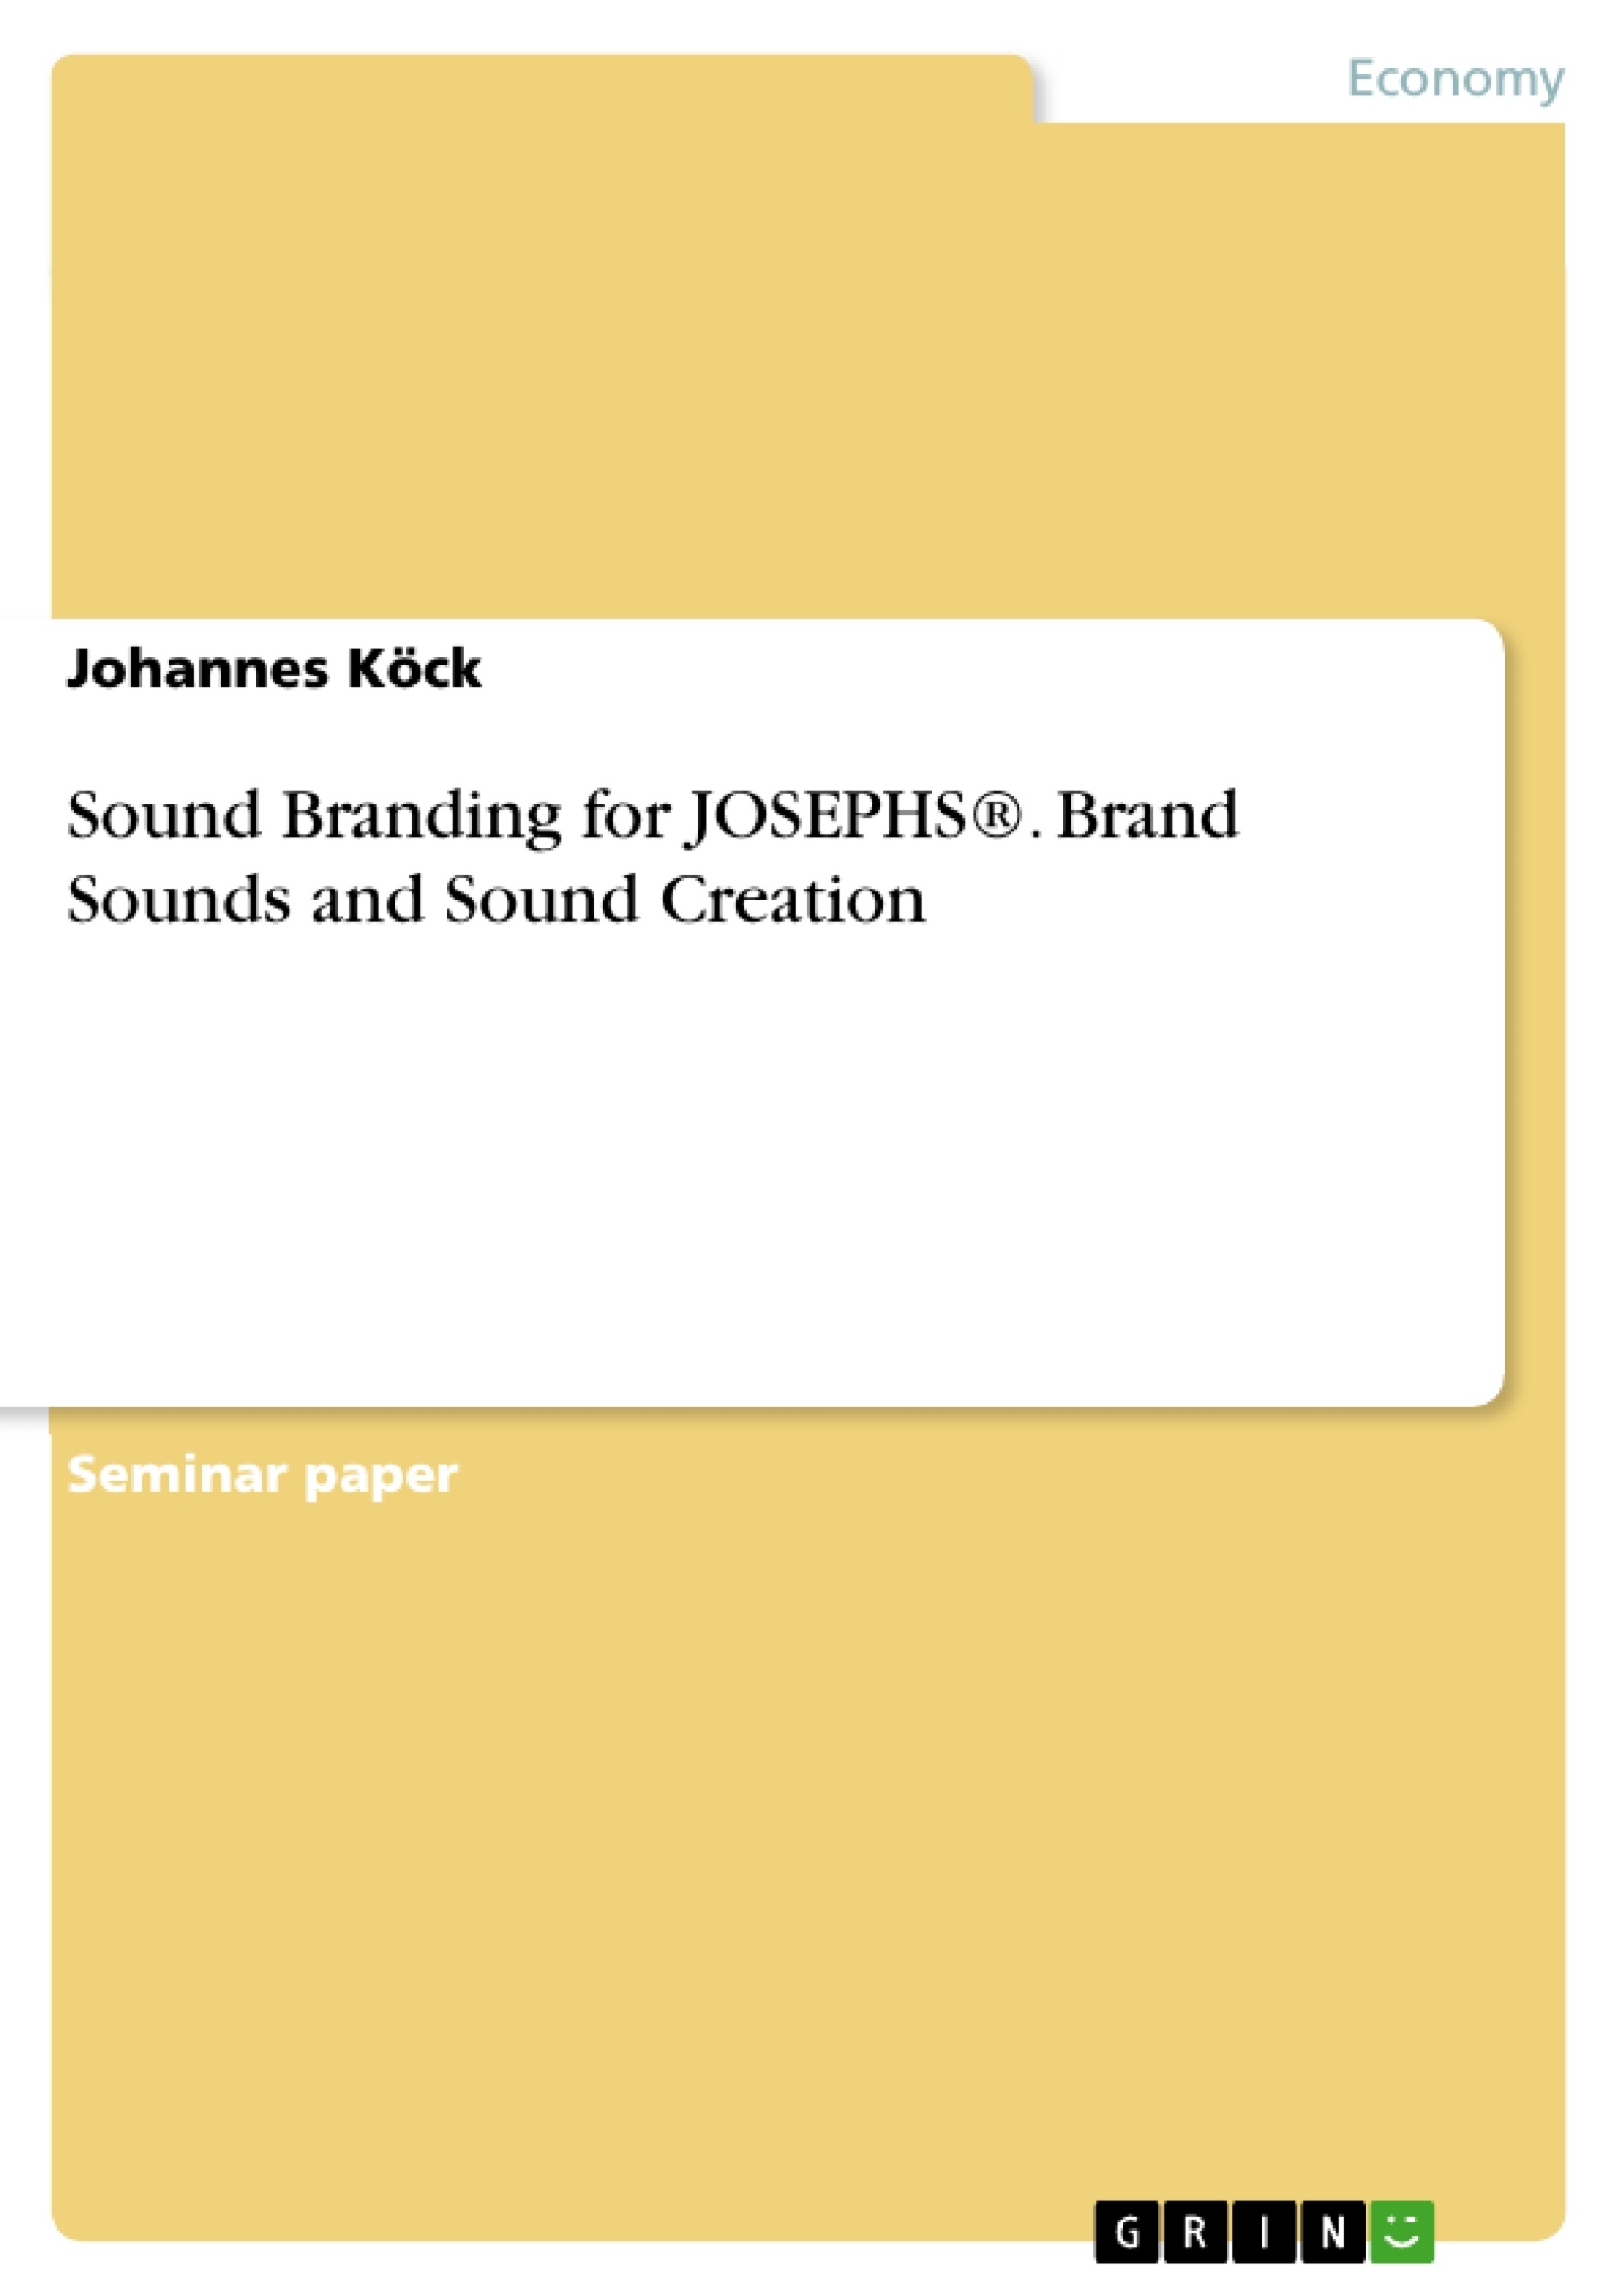 Título: Sound Branding for JOSEPHS®. Brand Sounds and Sound Creation